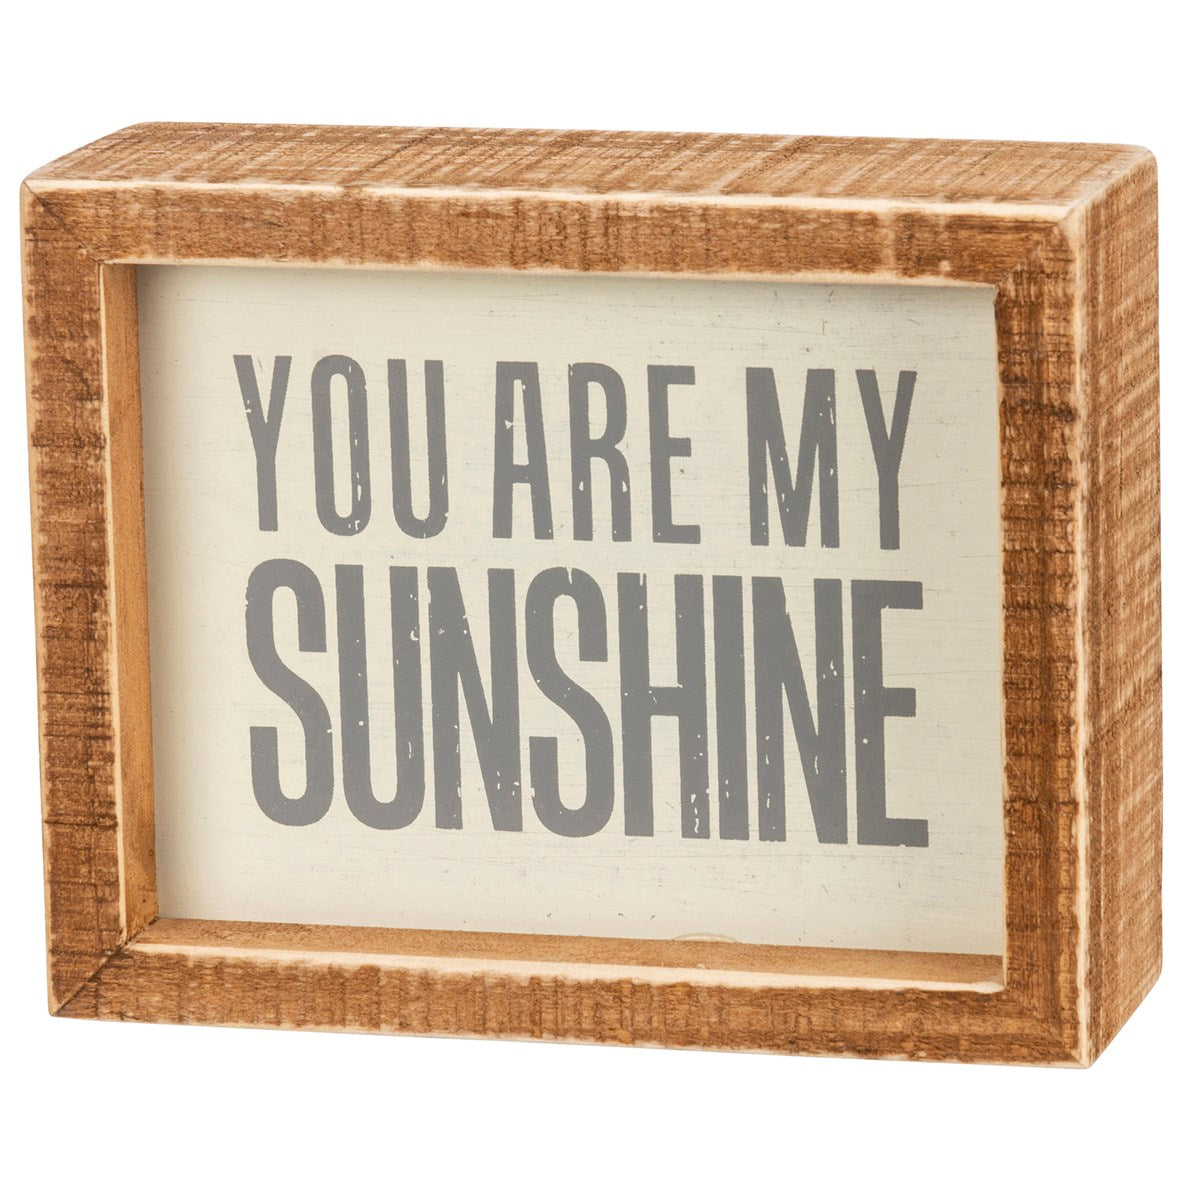 Box Sign - "You Are My Sunshine"